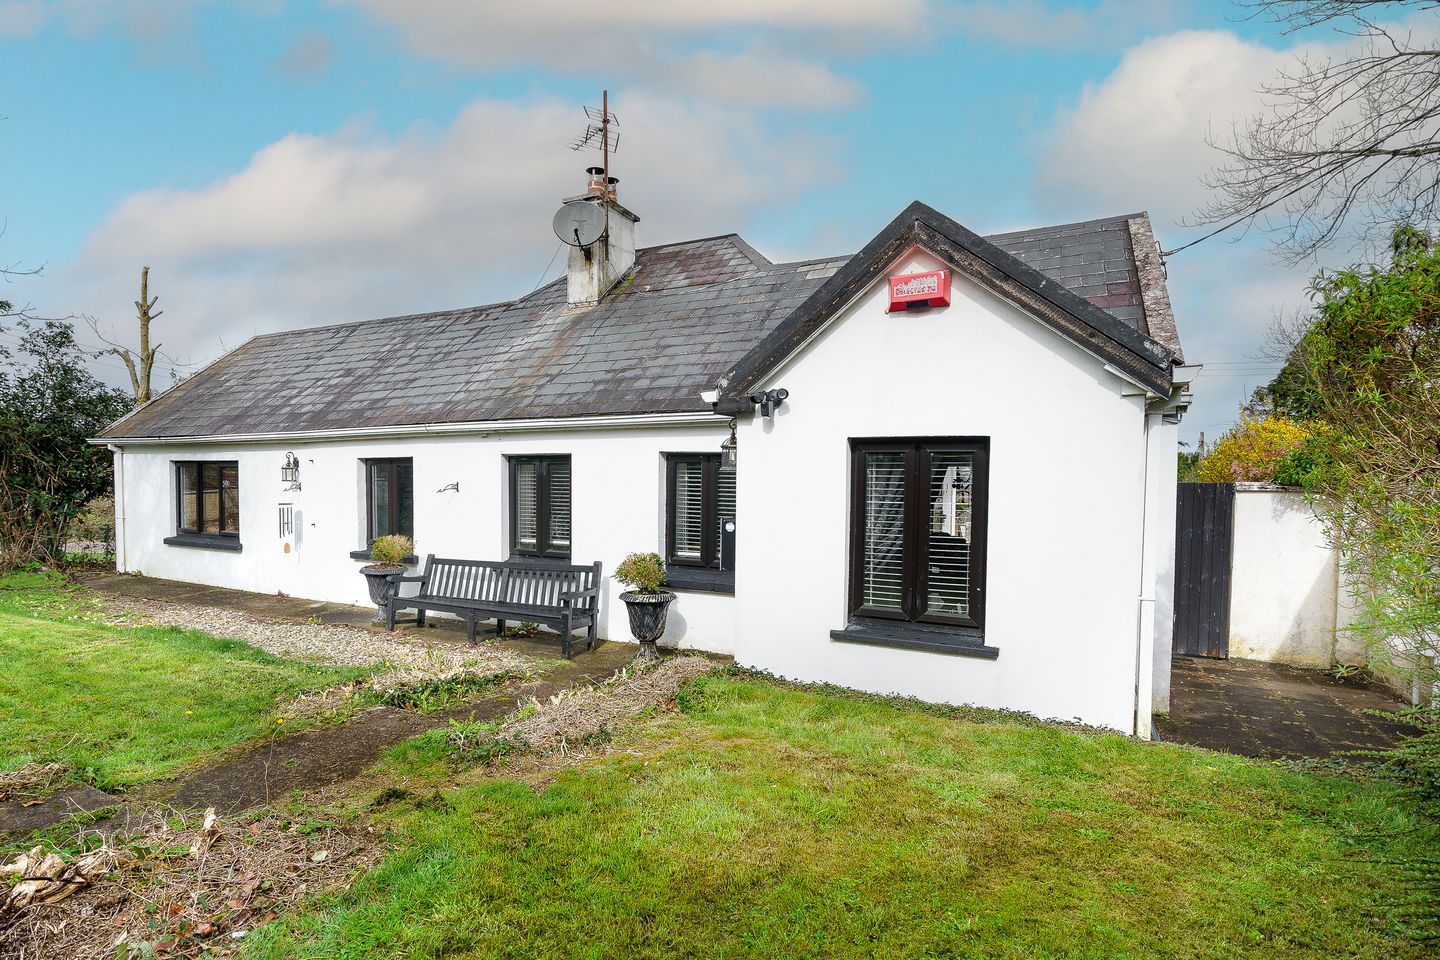 Bluebell Cottage, Glyntown, Glanmire, Co. Cork